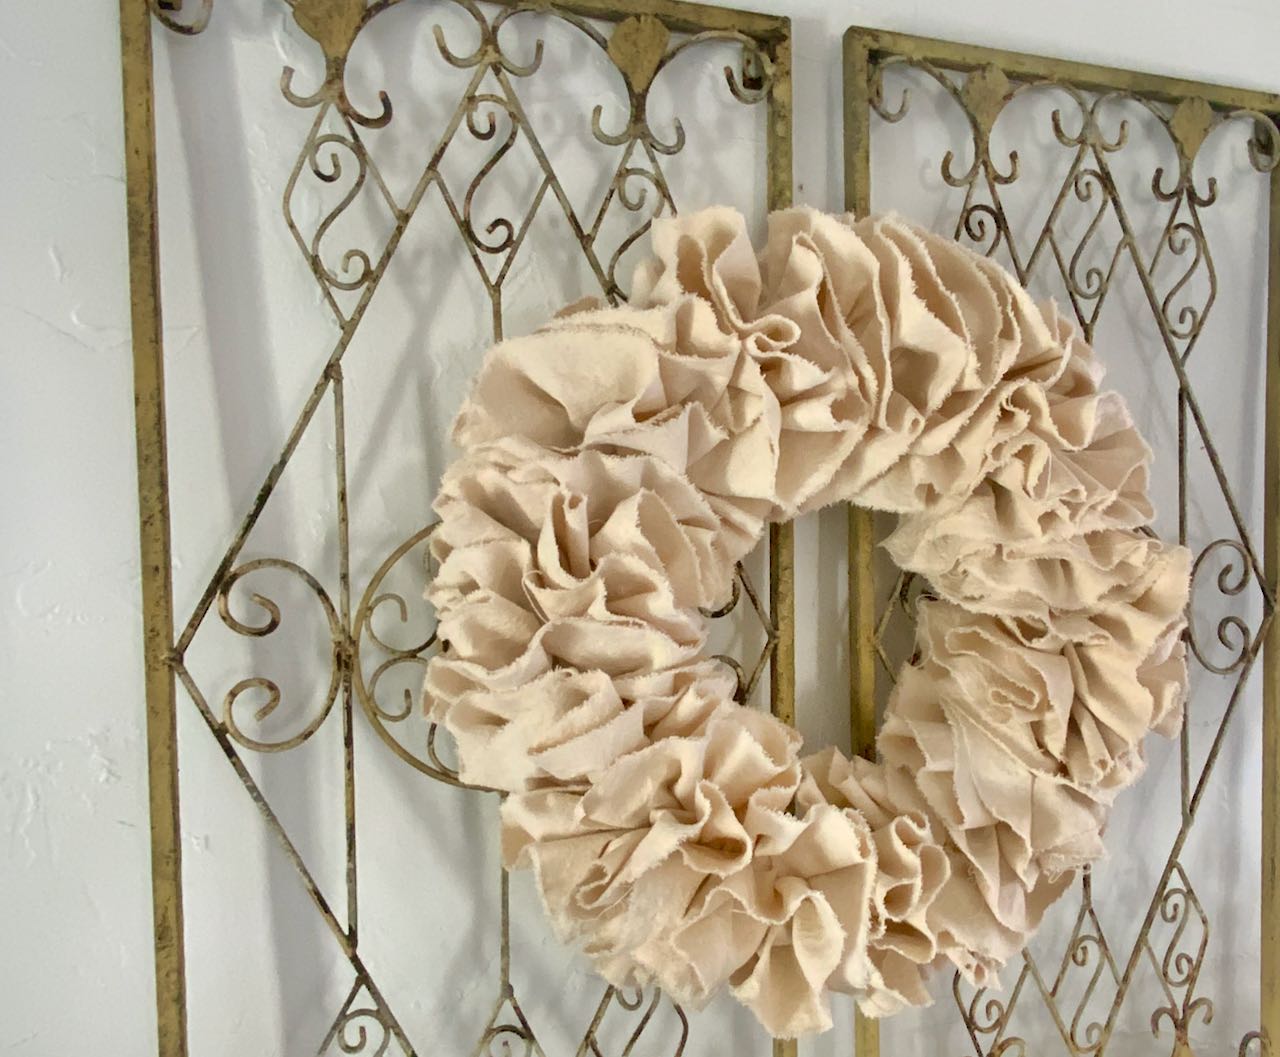 Wreath wired to two ornate trellises